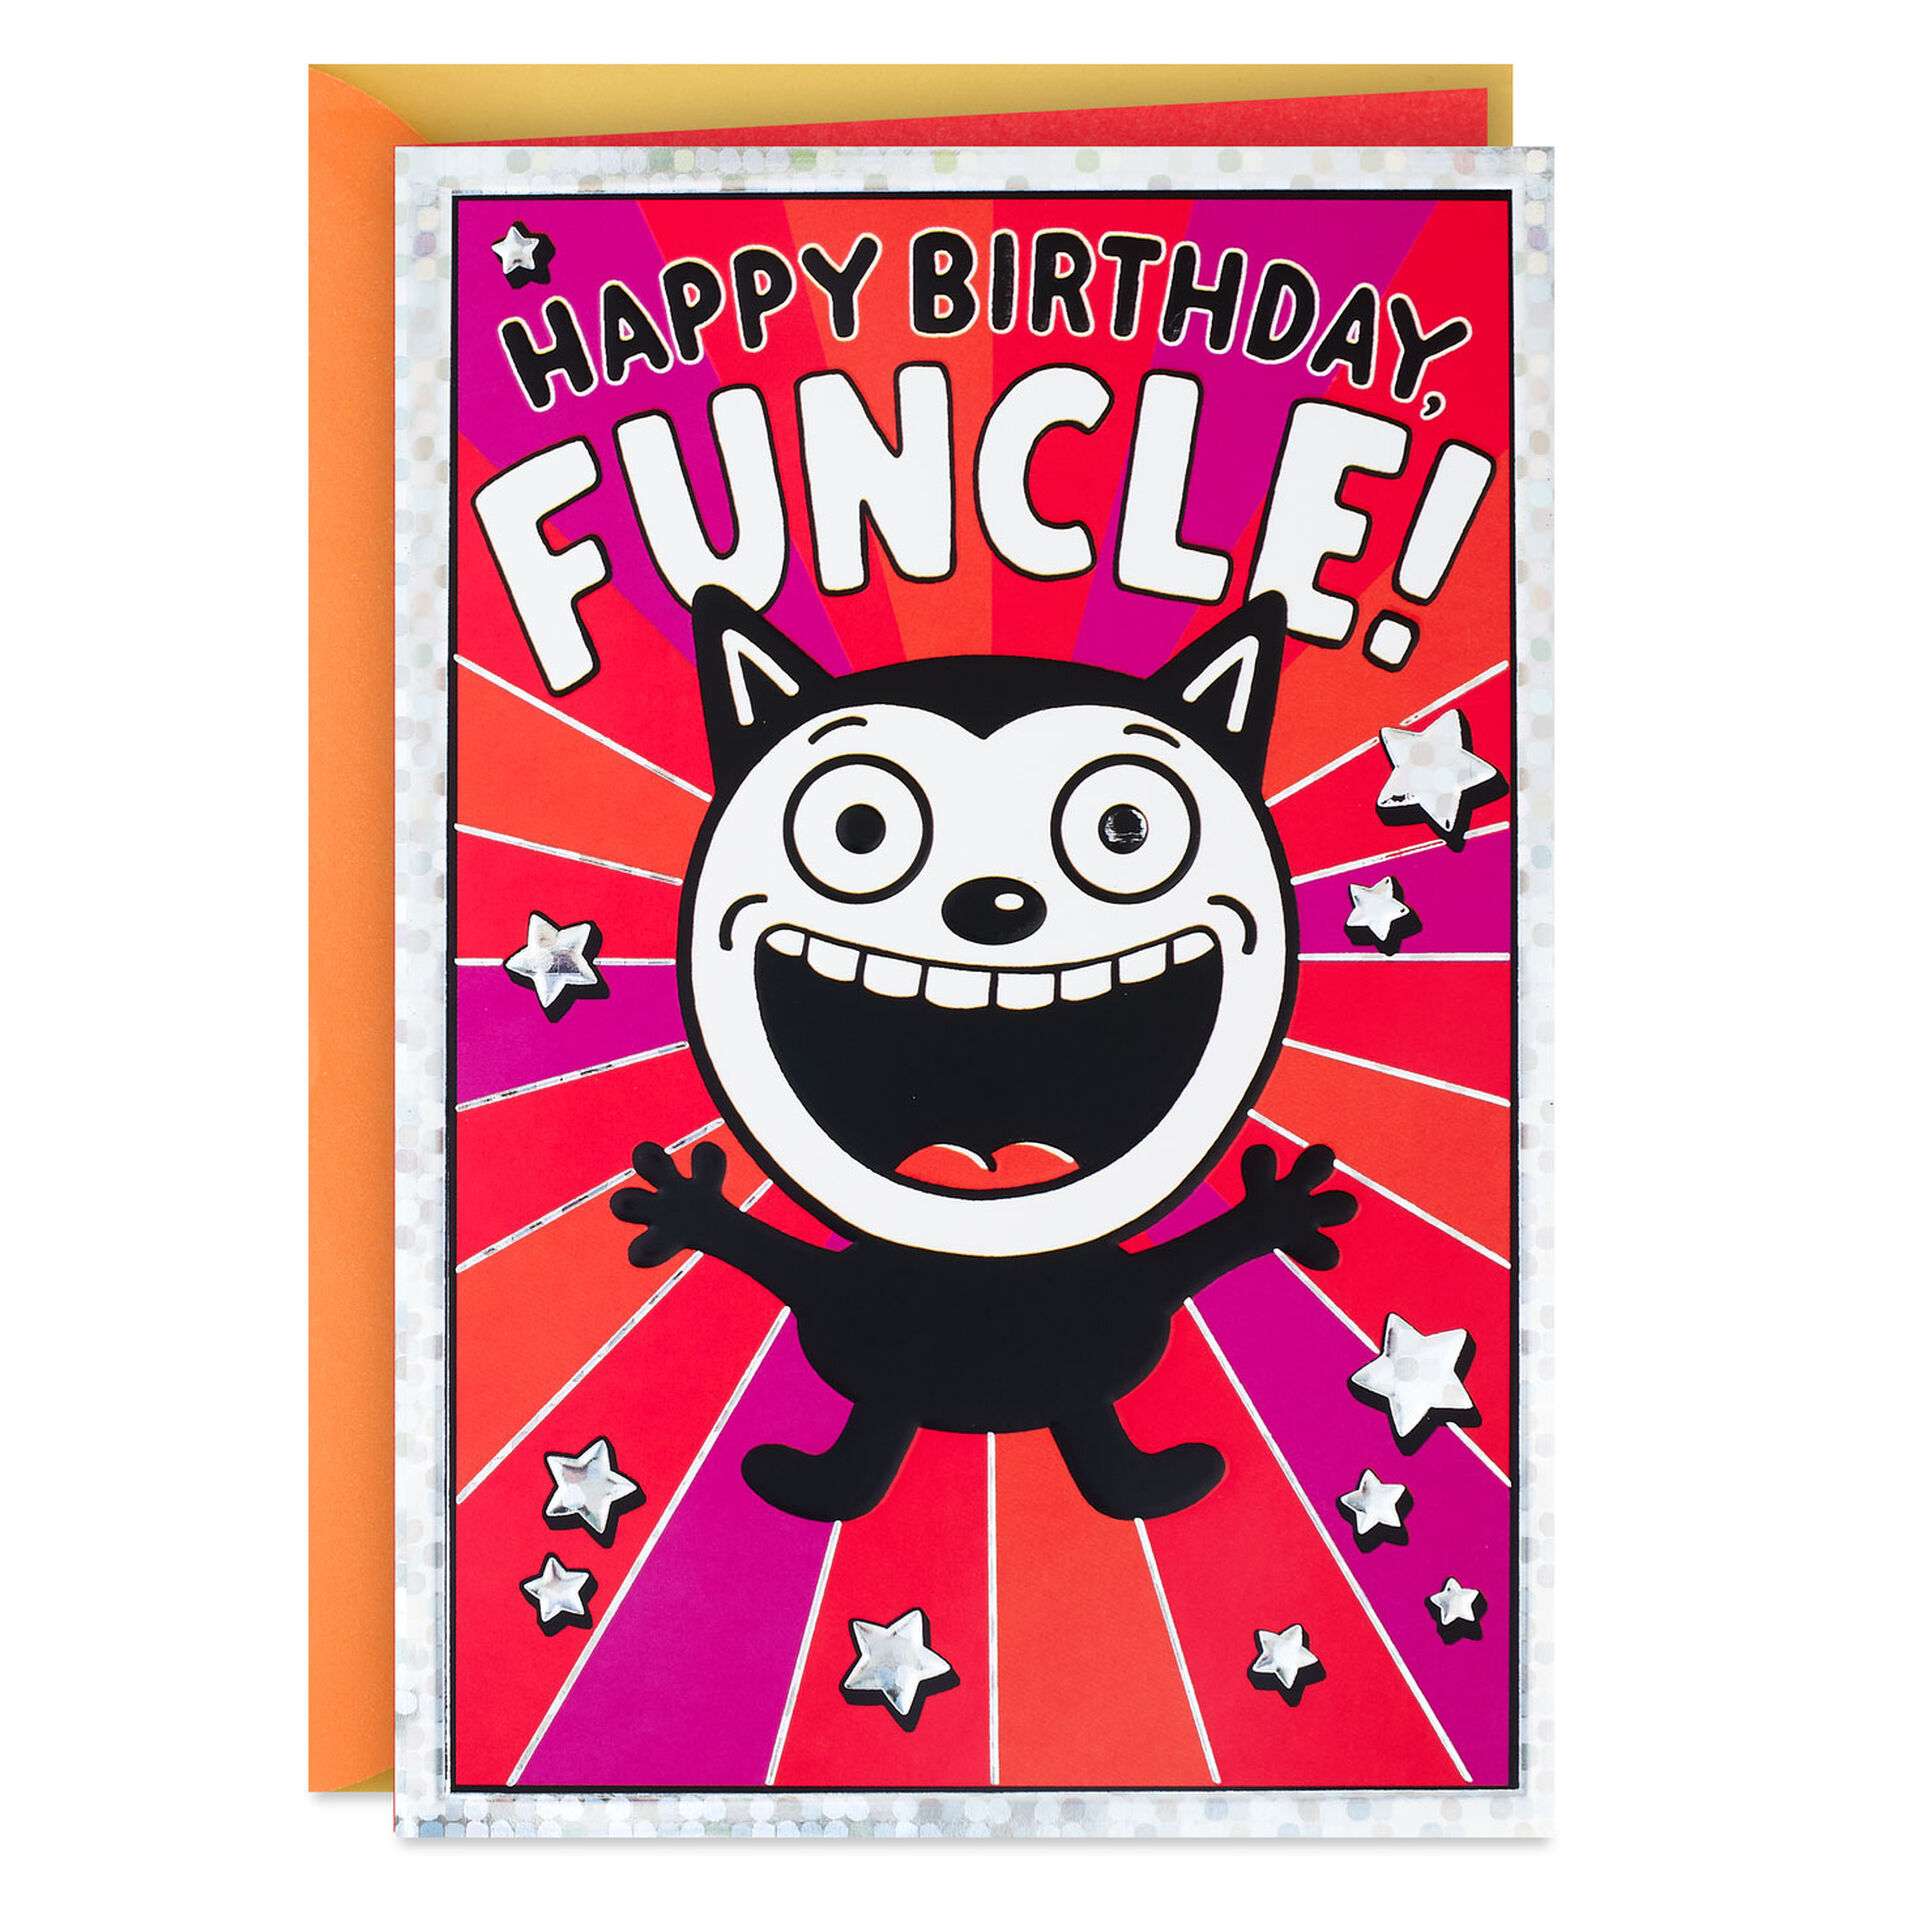 Retro-Cat-Cartoon-Birthday-Card-for-Uncle-From-Kid_399HKB6157_01